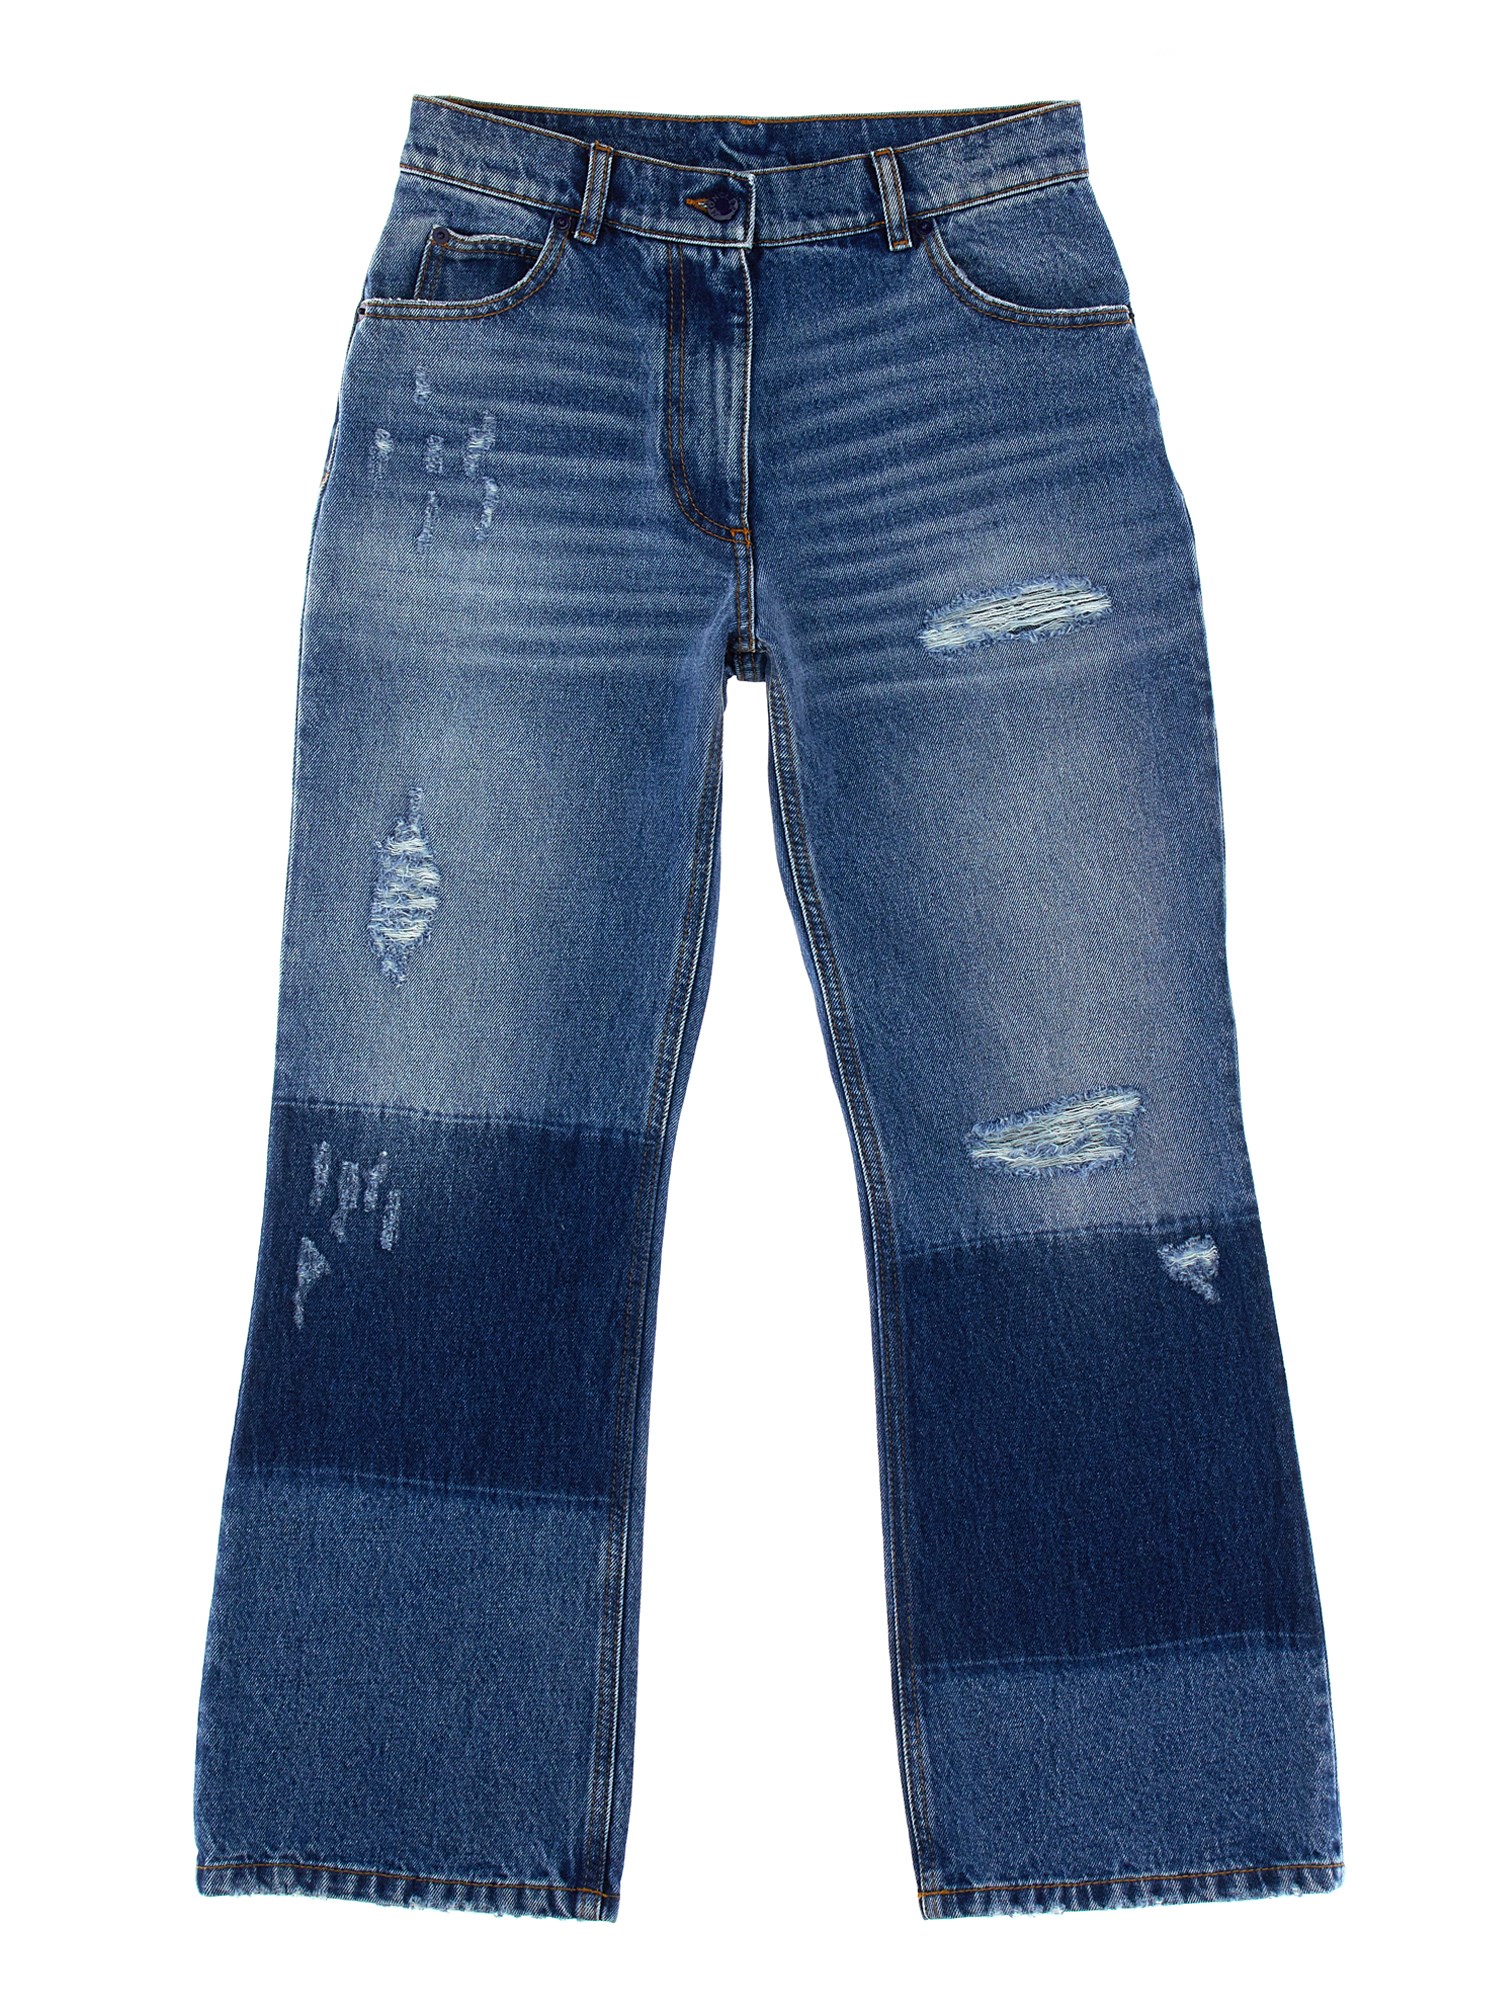 moncler genius jeans with star inlays 8 moncler palm angels